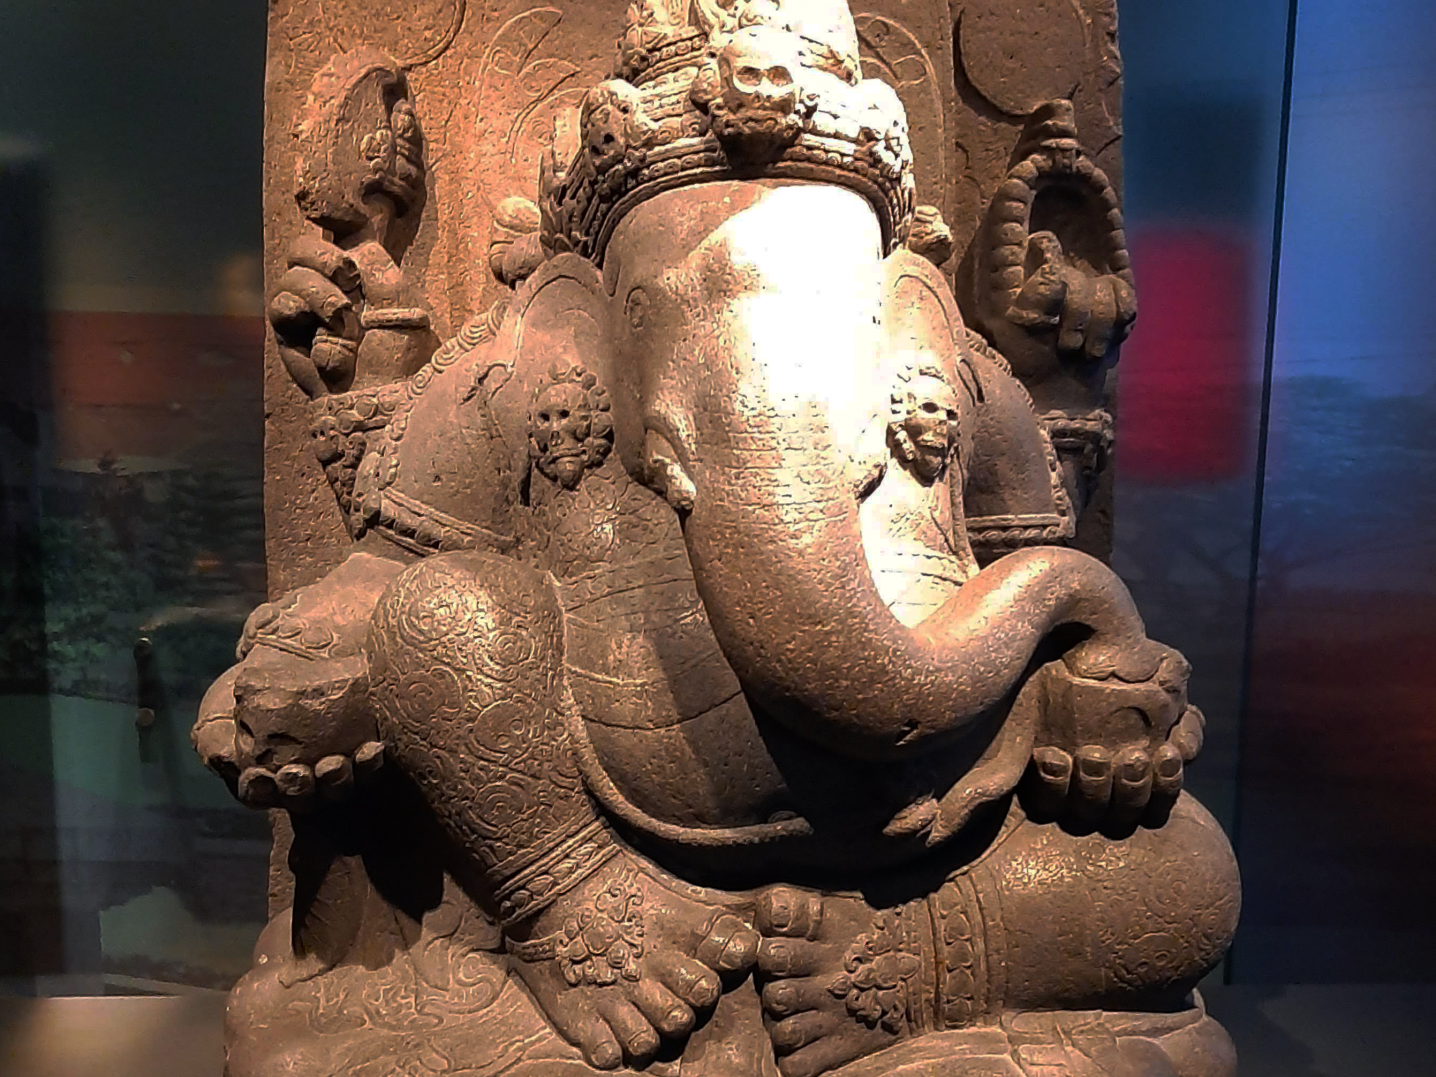 A stone statue of Krishna in the shape of a an elephant.